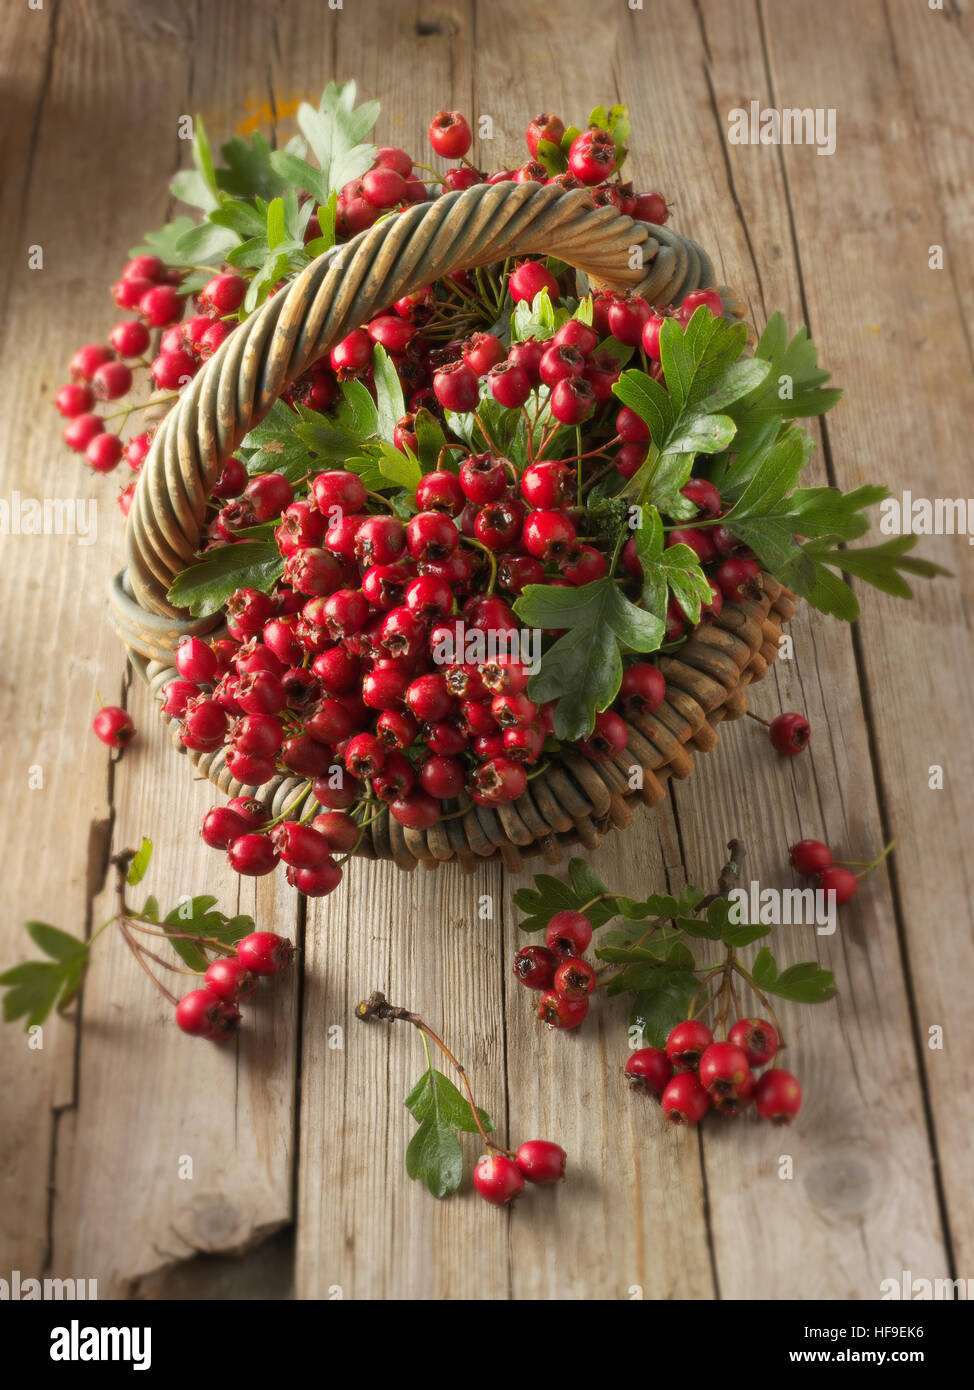 May-tree, whitethorn, or hawberry (Crataegus sp.), fresh berries and foliage in basket on wooden planks Stock Photo